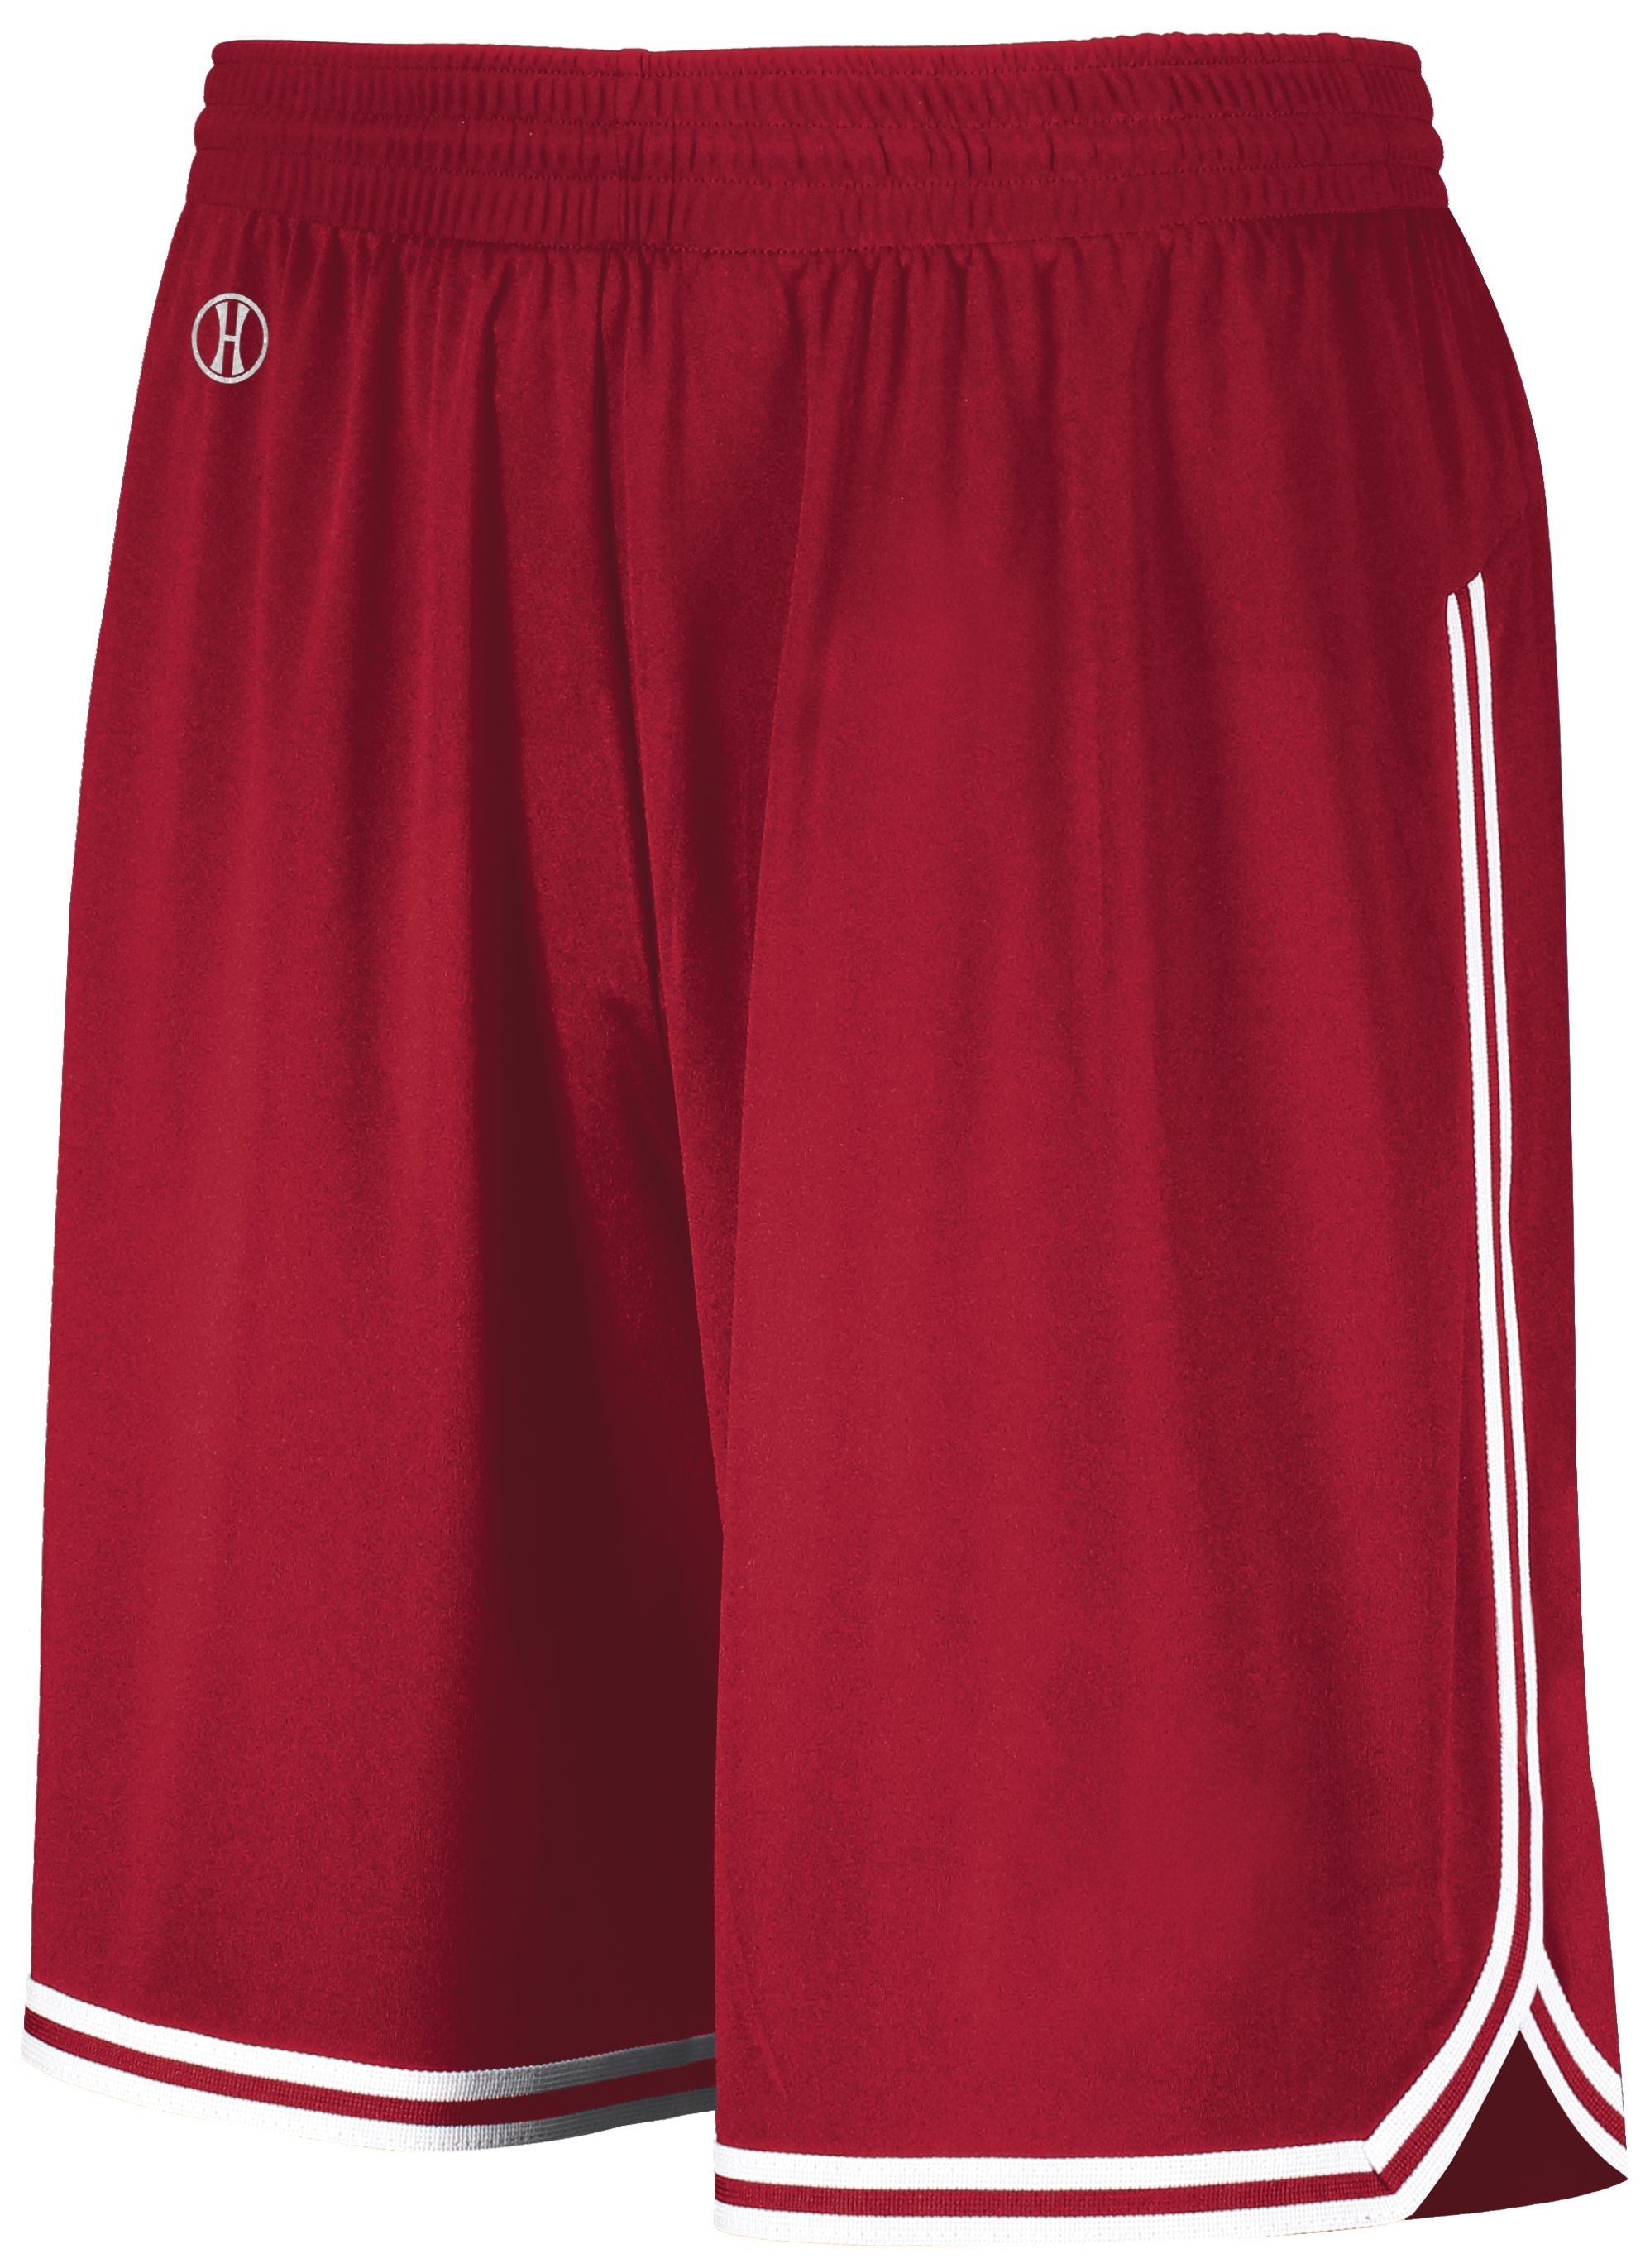 Holloway Retro Basketball Shorts in Scarlet/White  -Part of the Adult, Adult-Shorts, Basketball, Holloway, All-Sports, All-Sports-1 product lines at KanaleyCreations.com